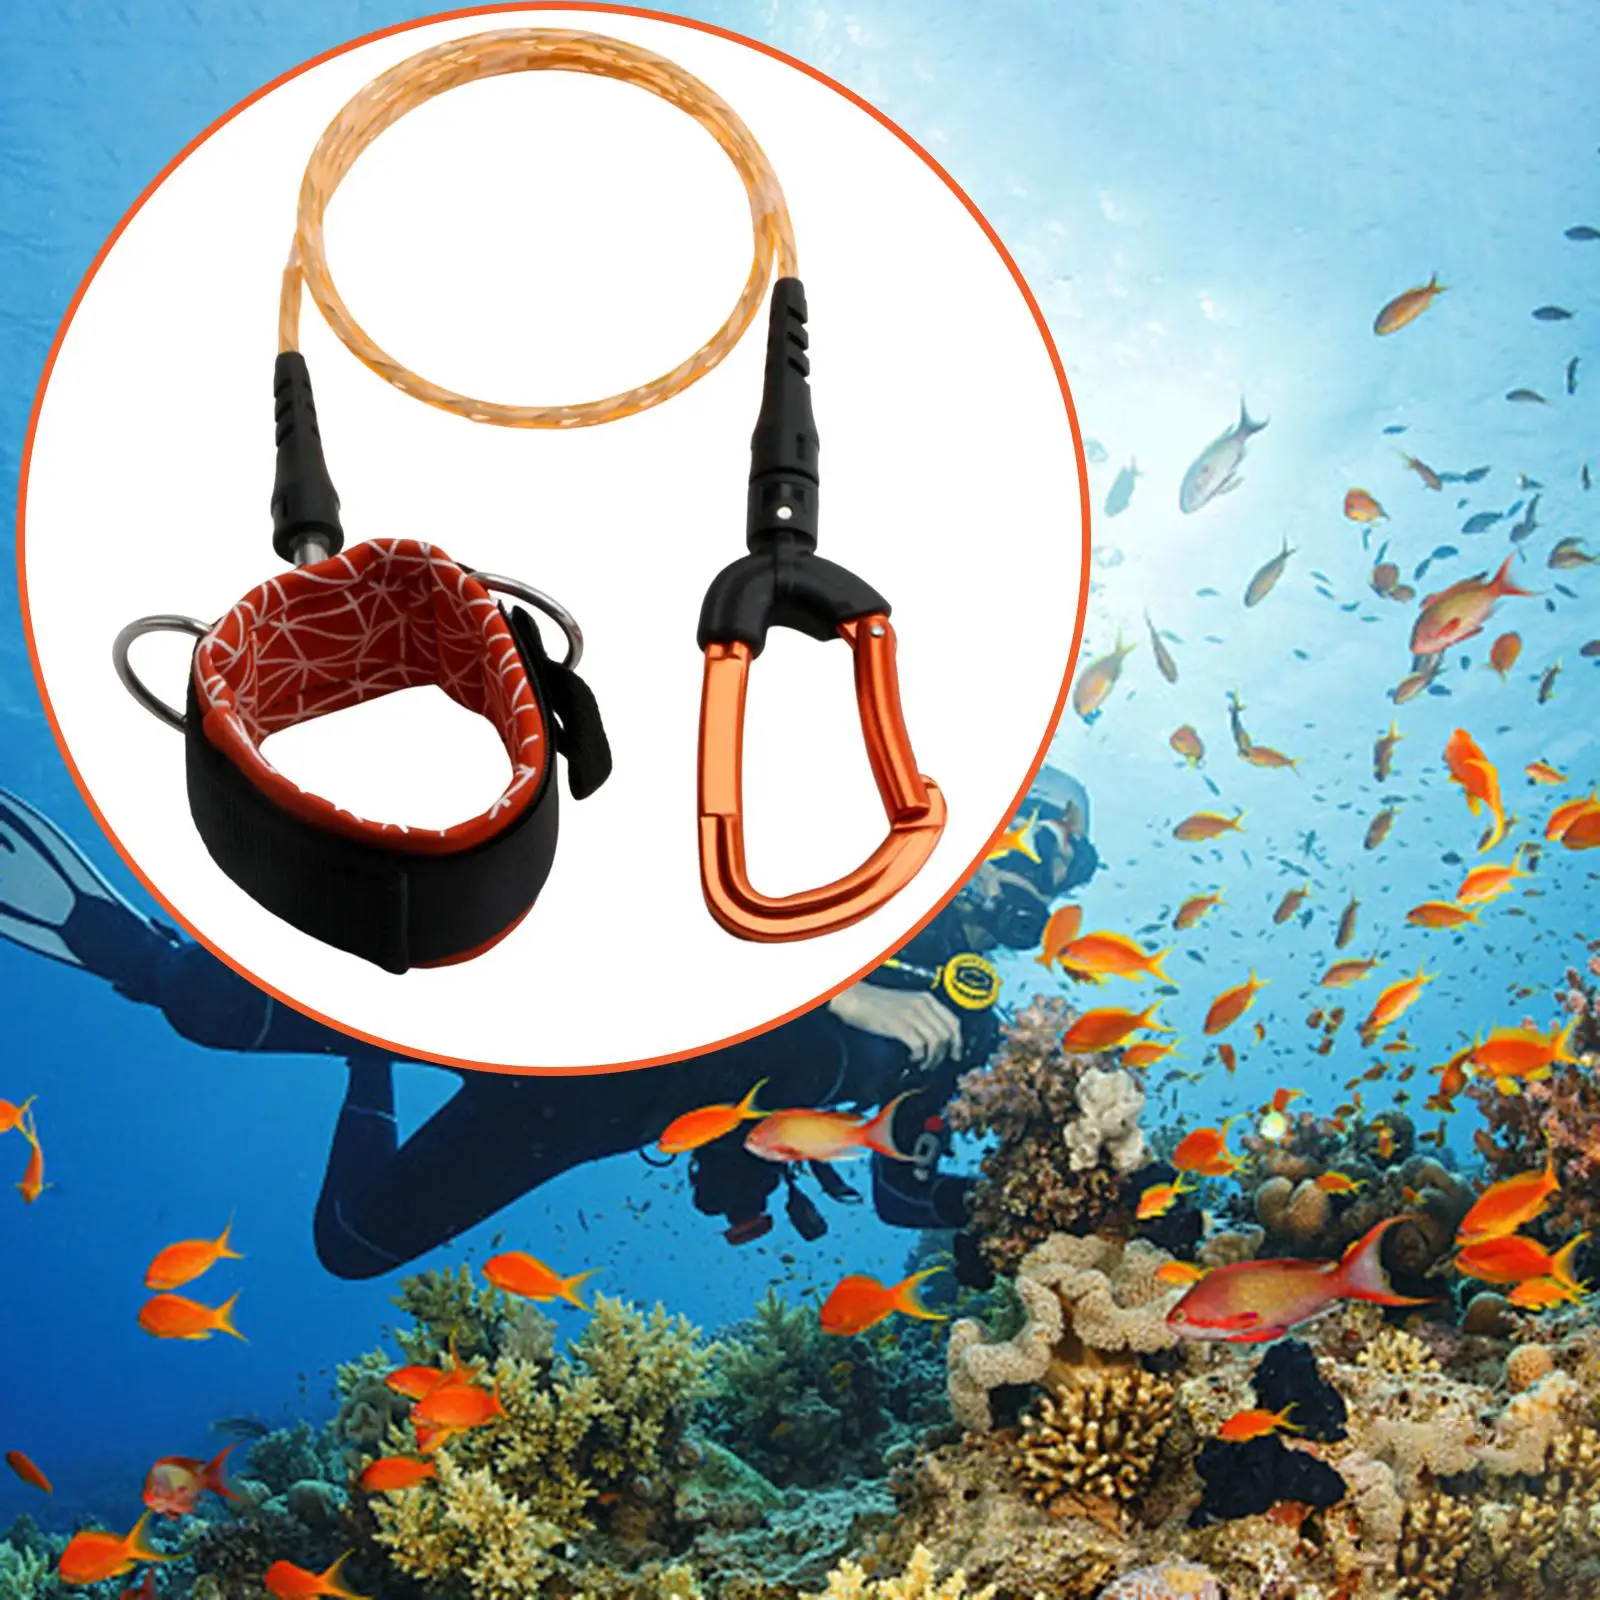 Freediving Lanyard Durable Anti Lost Safety Cable Scuba Diving Rope for Snorkeling Freediving Underwater Sports Gear Accessories